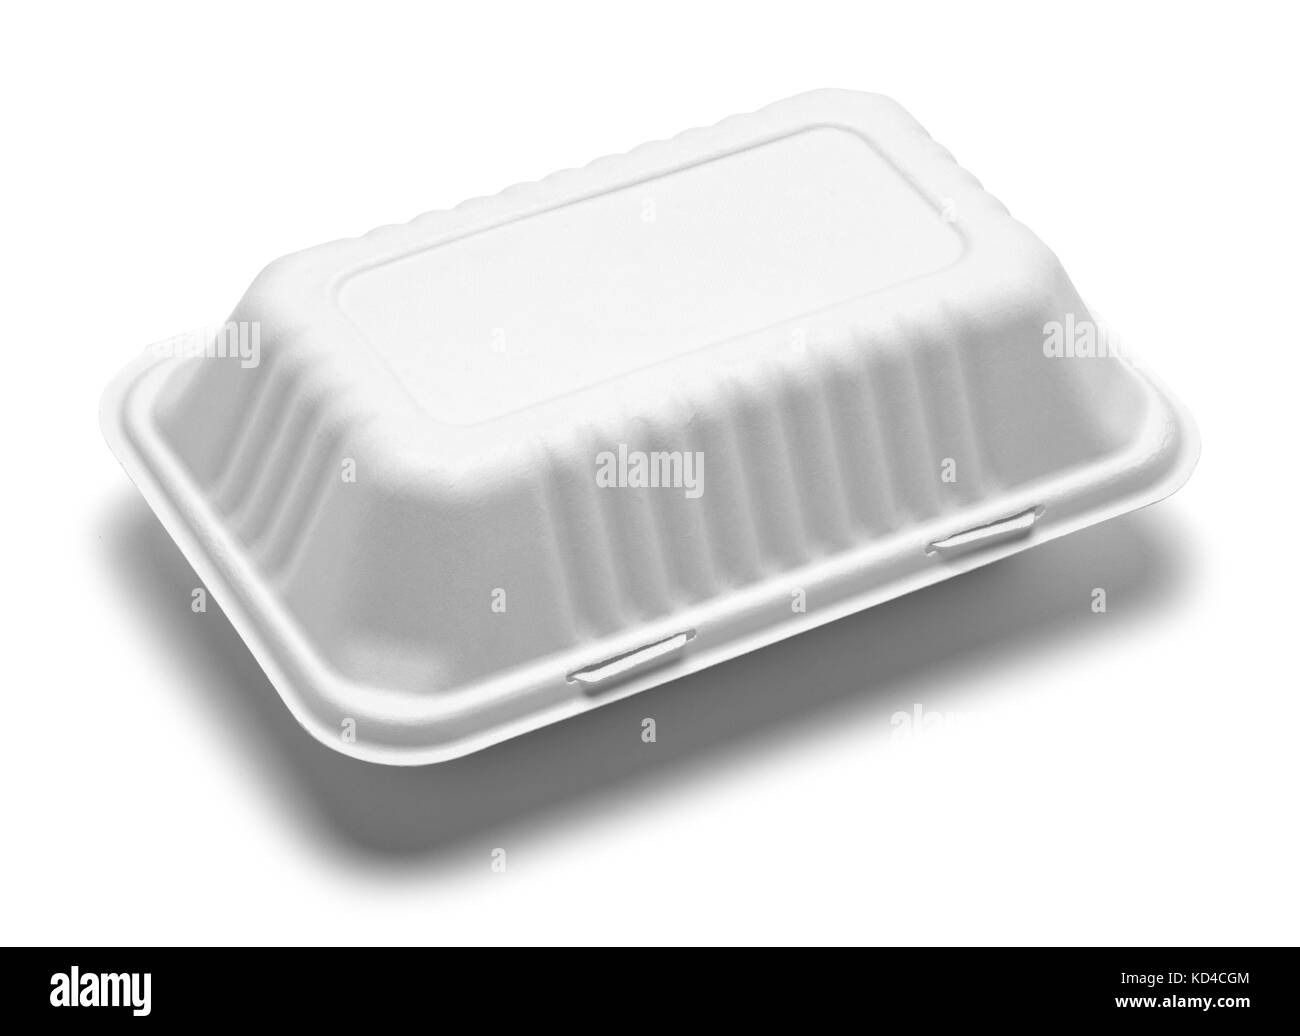 White Carboard Take Out Food Box Isolated on a White Background. Stock Photo